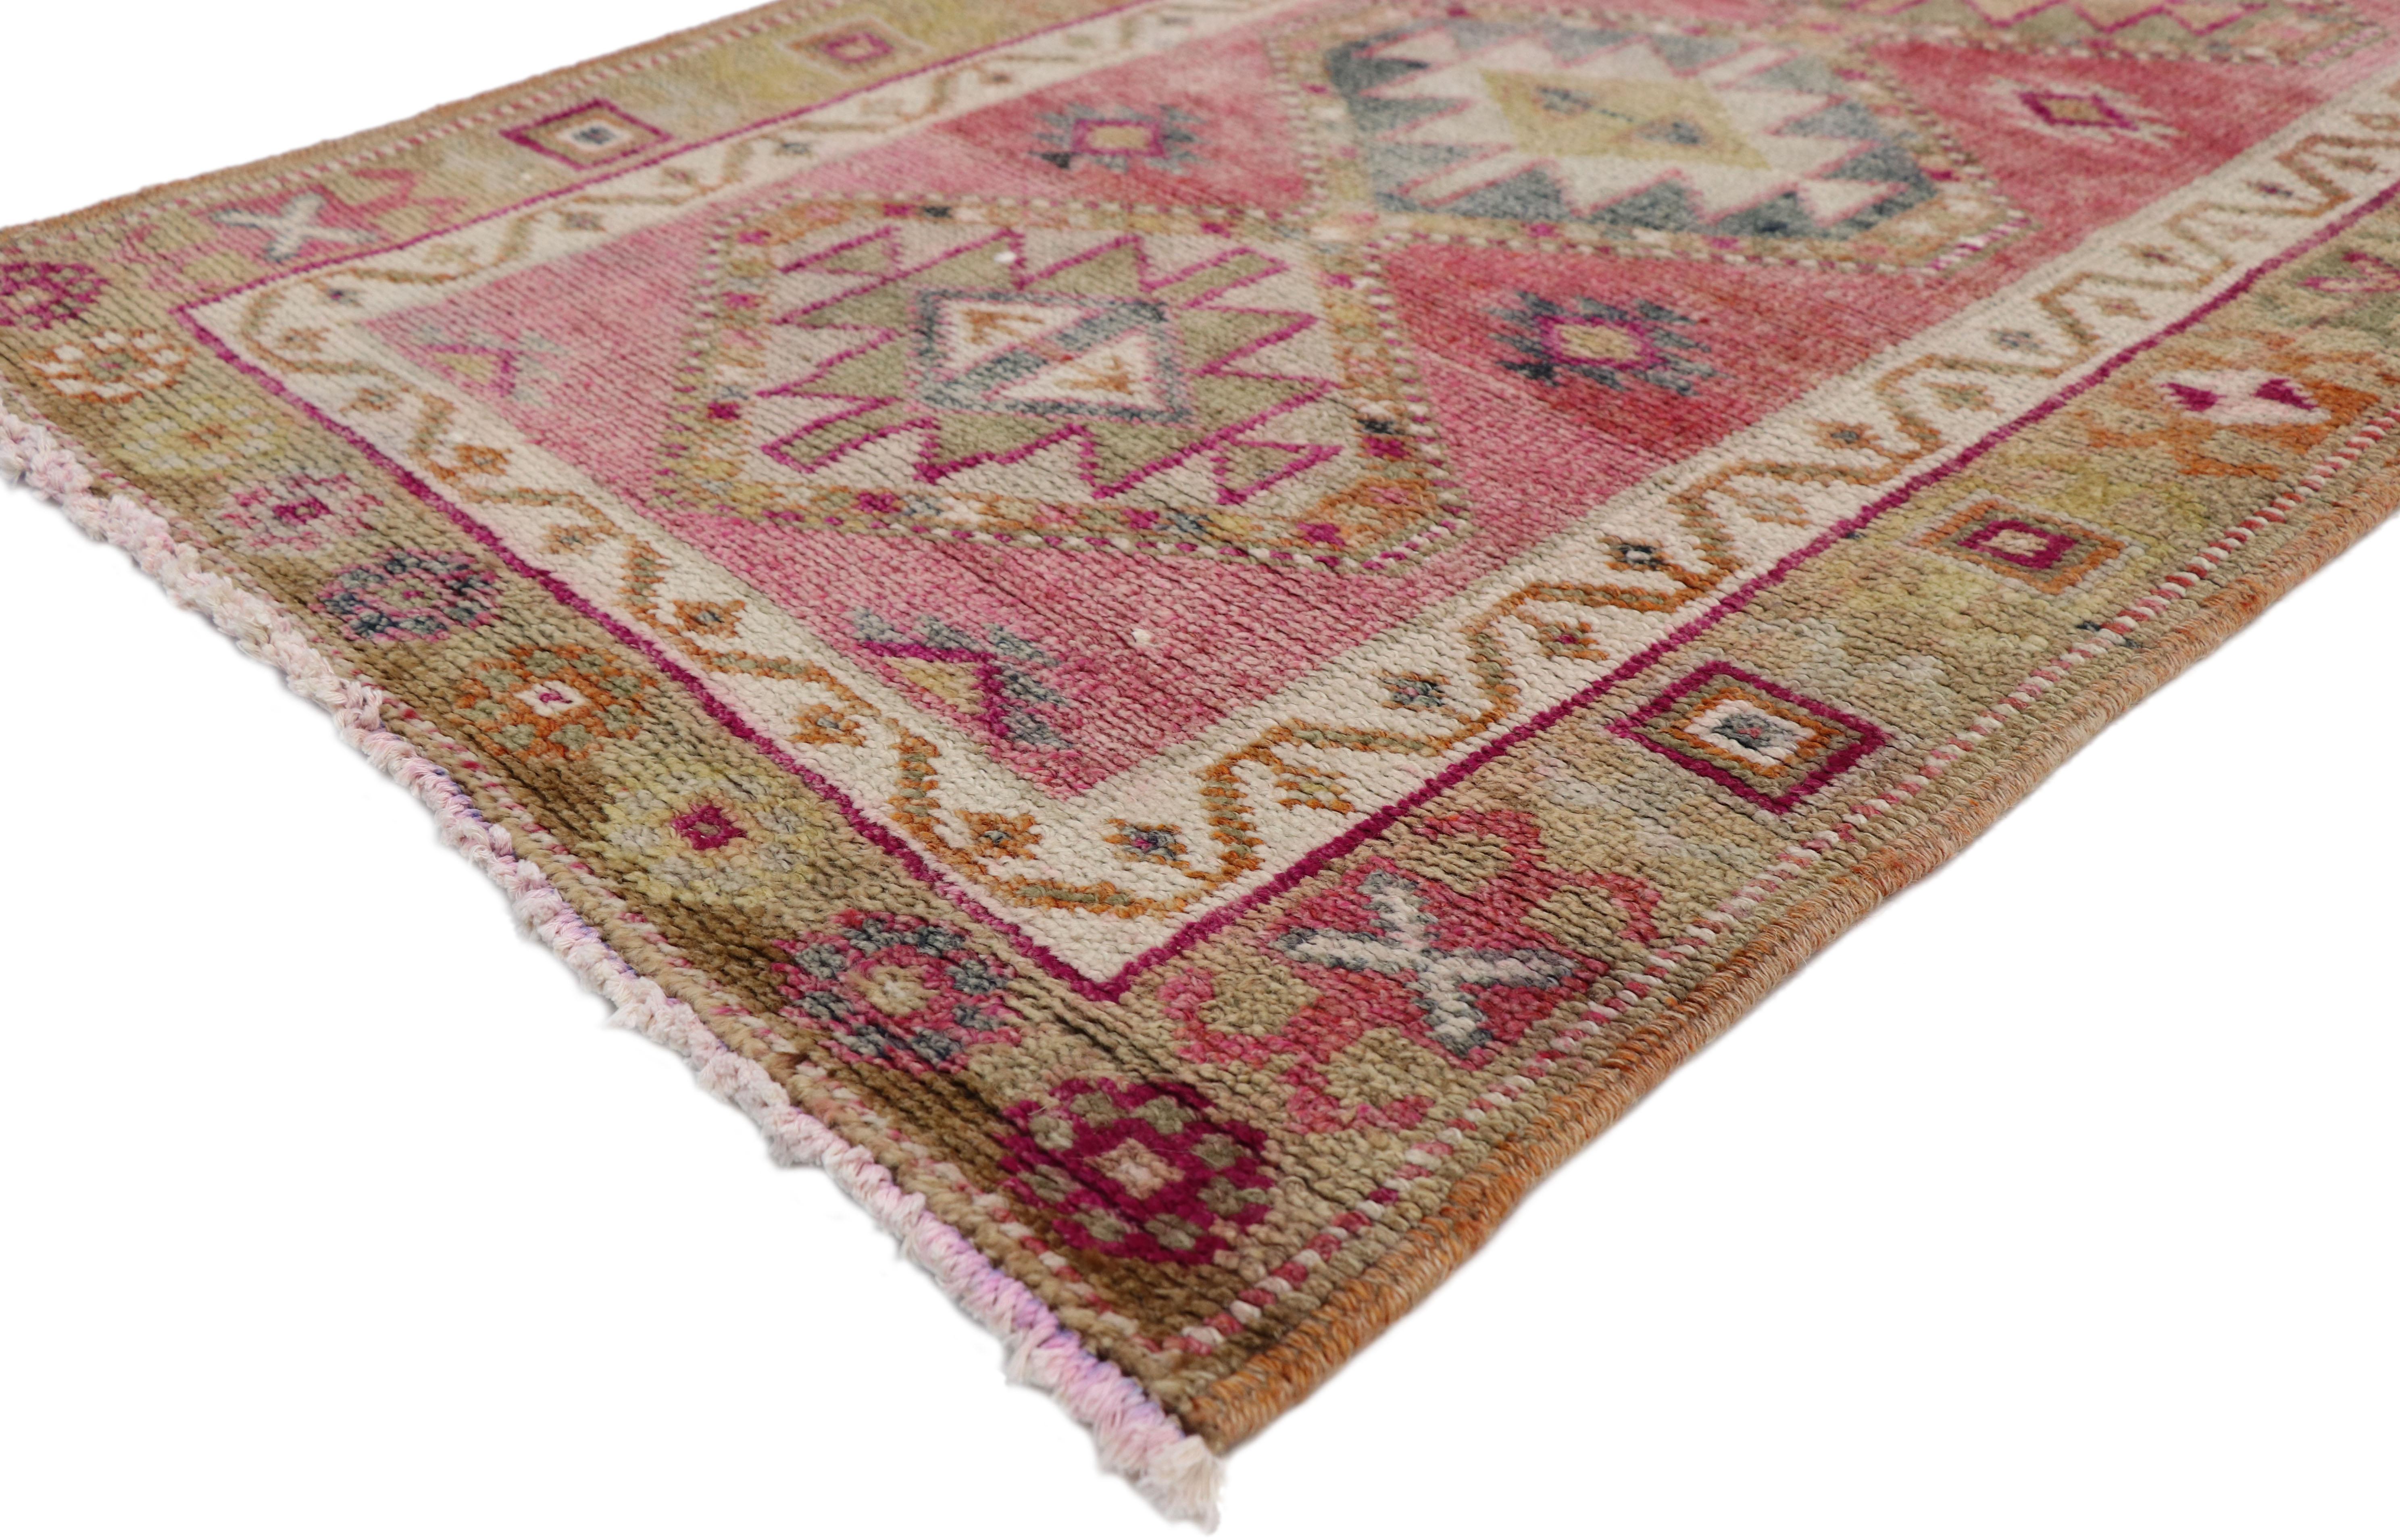 52059 Vintage Turkish Oushak Runner with Modern Tribal Style, Long Hallway Runner. Full of character and stately presence, this vintage Turkish Oushak runner features an intrinsic geometric pattern. Running along the icenter of this extra long